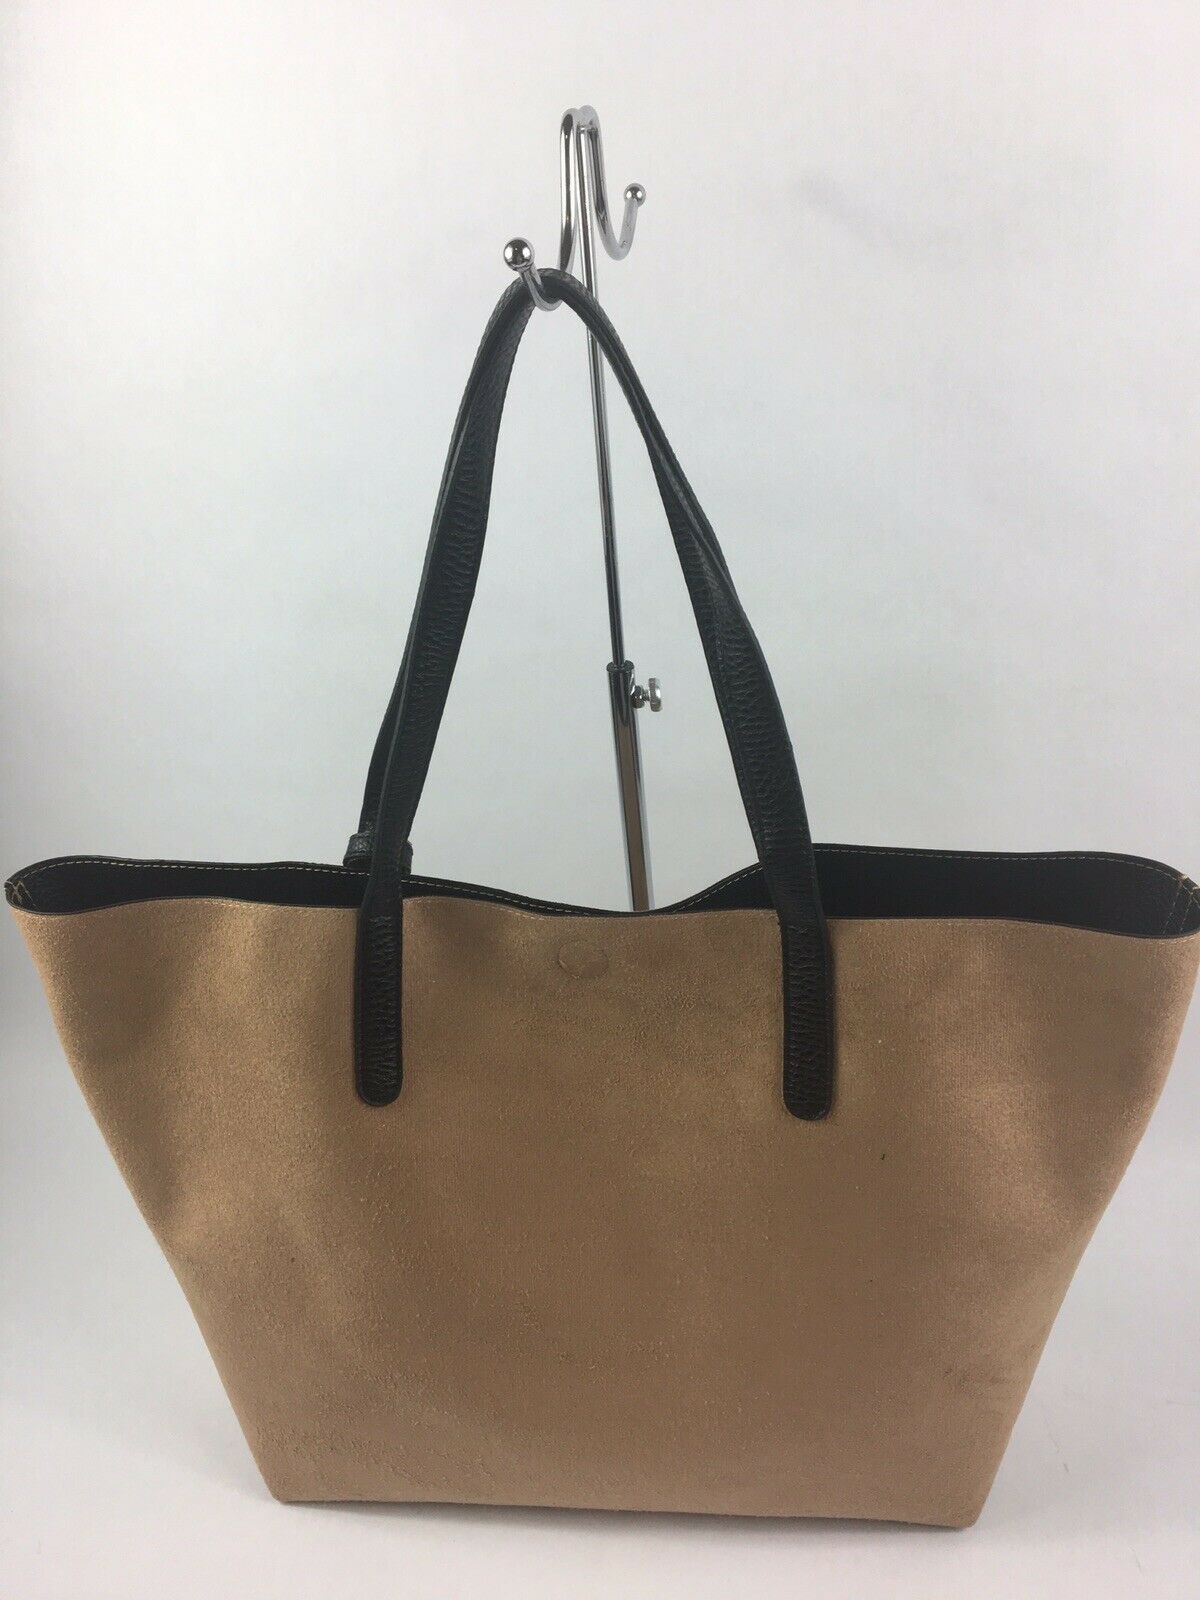 Style & Co Clean Cut Tote Butternut Wood/Black - Outlet Designers